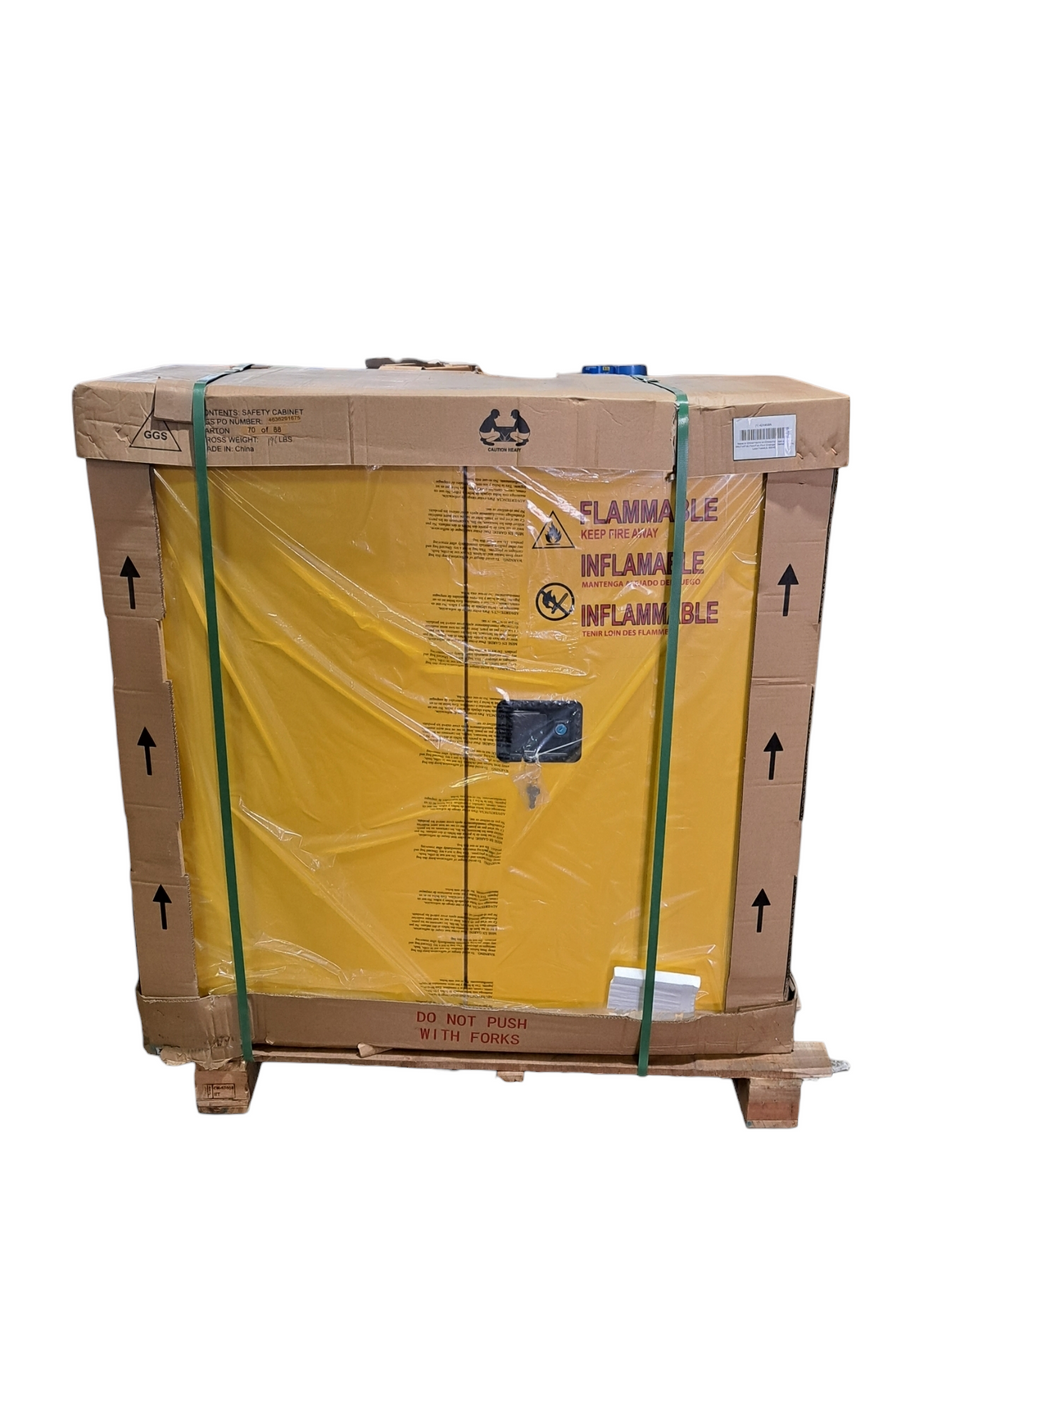 Flammables, Safety Cabinet, 42X499A, Model 300, 30 gal, 0 Drum, 43 in x 18 in x 45 1/2 in, Yellow - MINOR COSMETIC DAMAGES - FreemanLiquidators - [product_description]